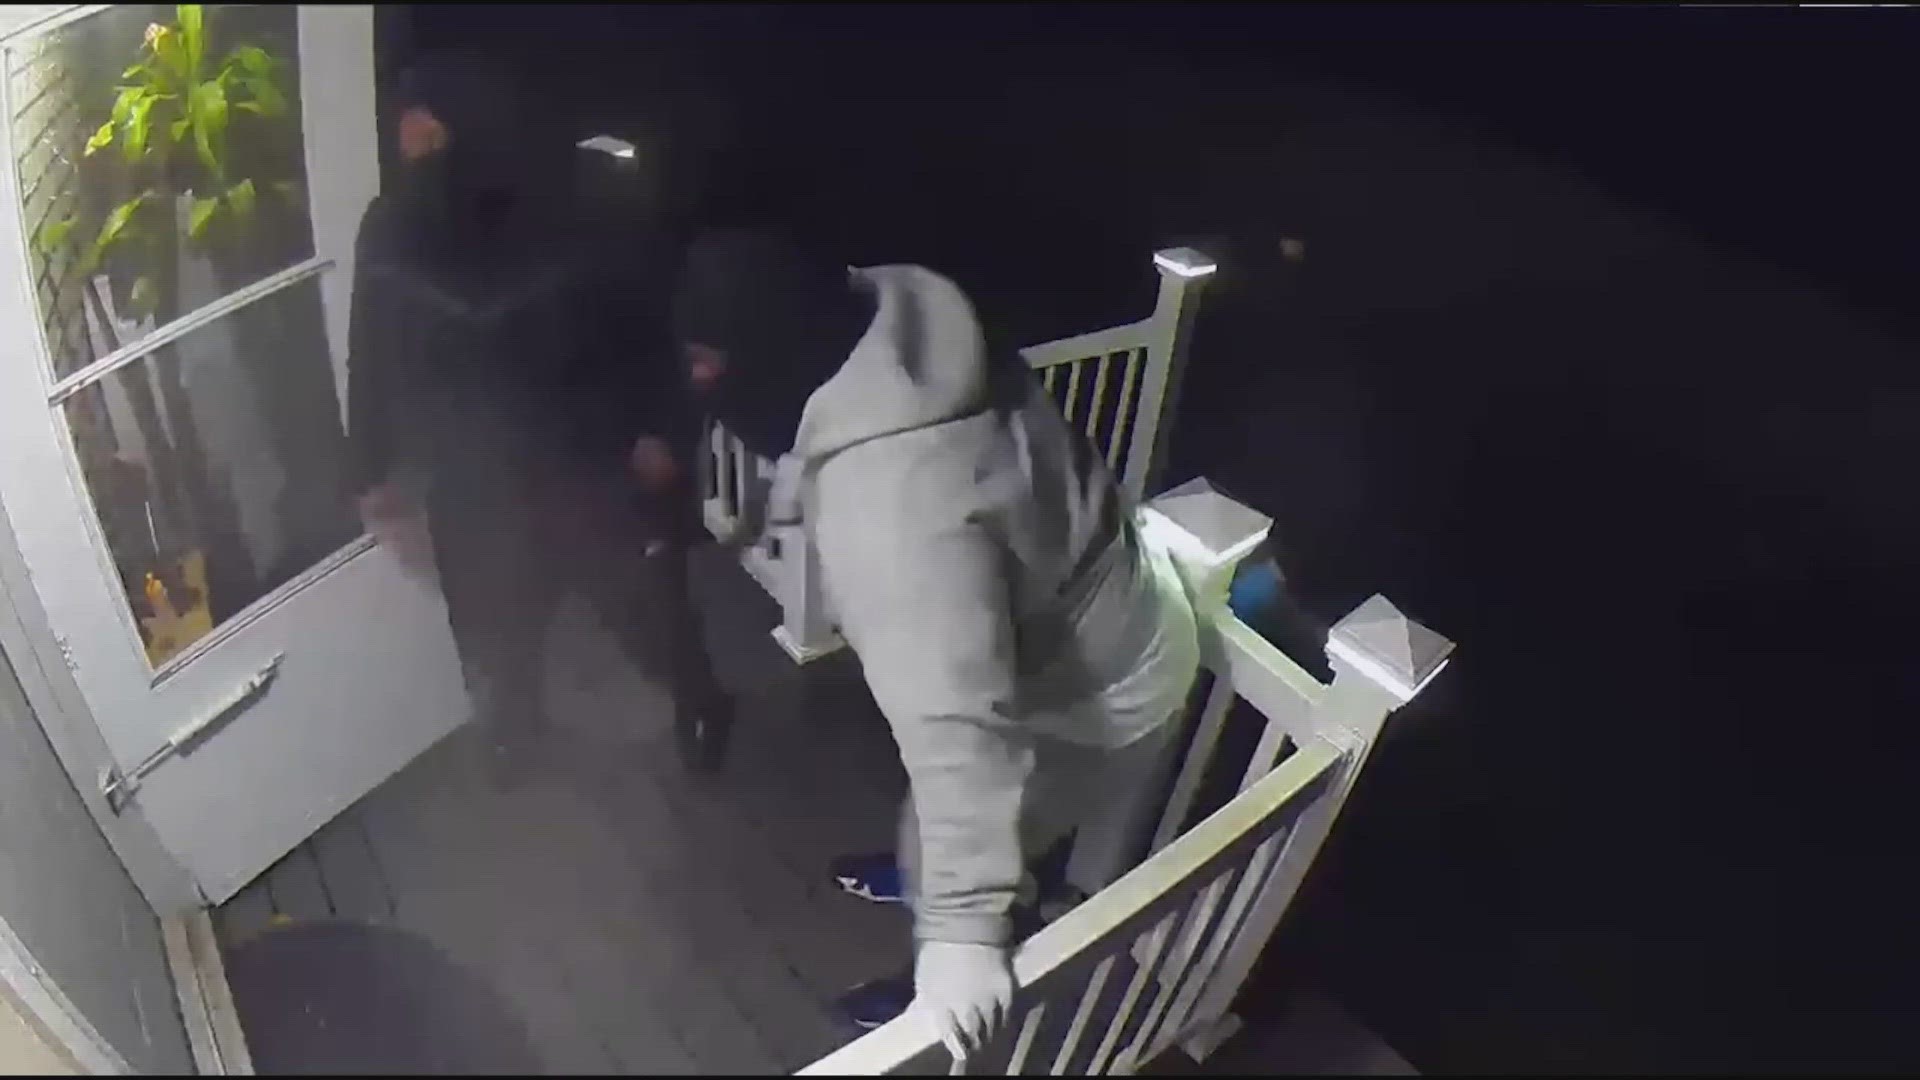 Security footage shows the suspects shouting "Seattle police" before attempting to kick in the front door